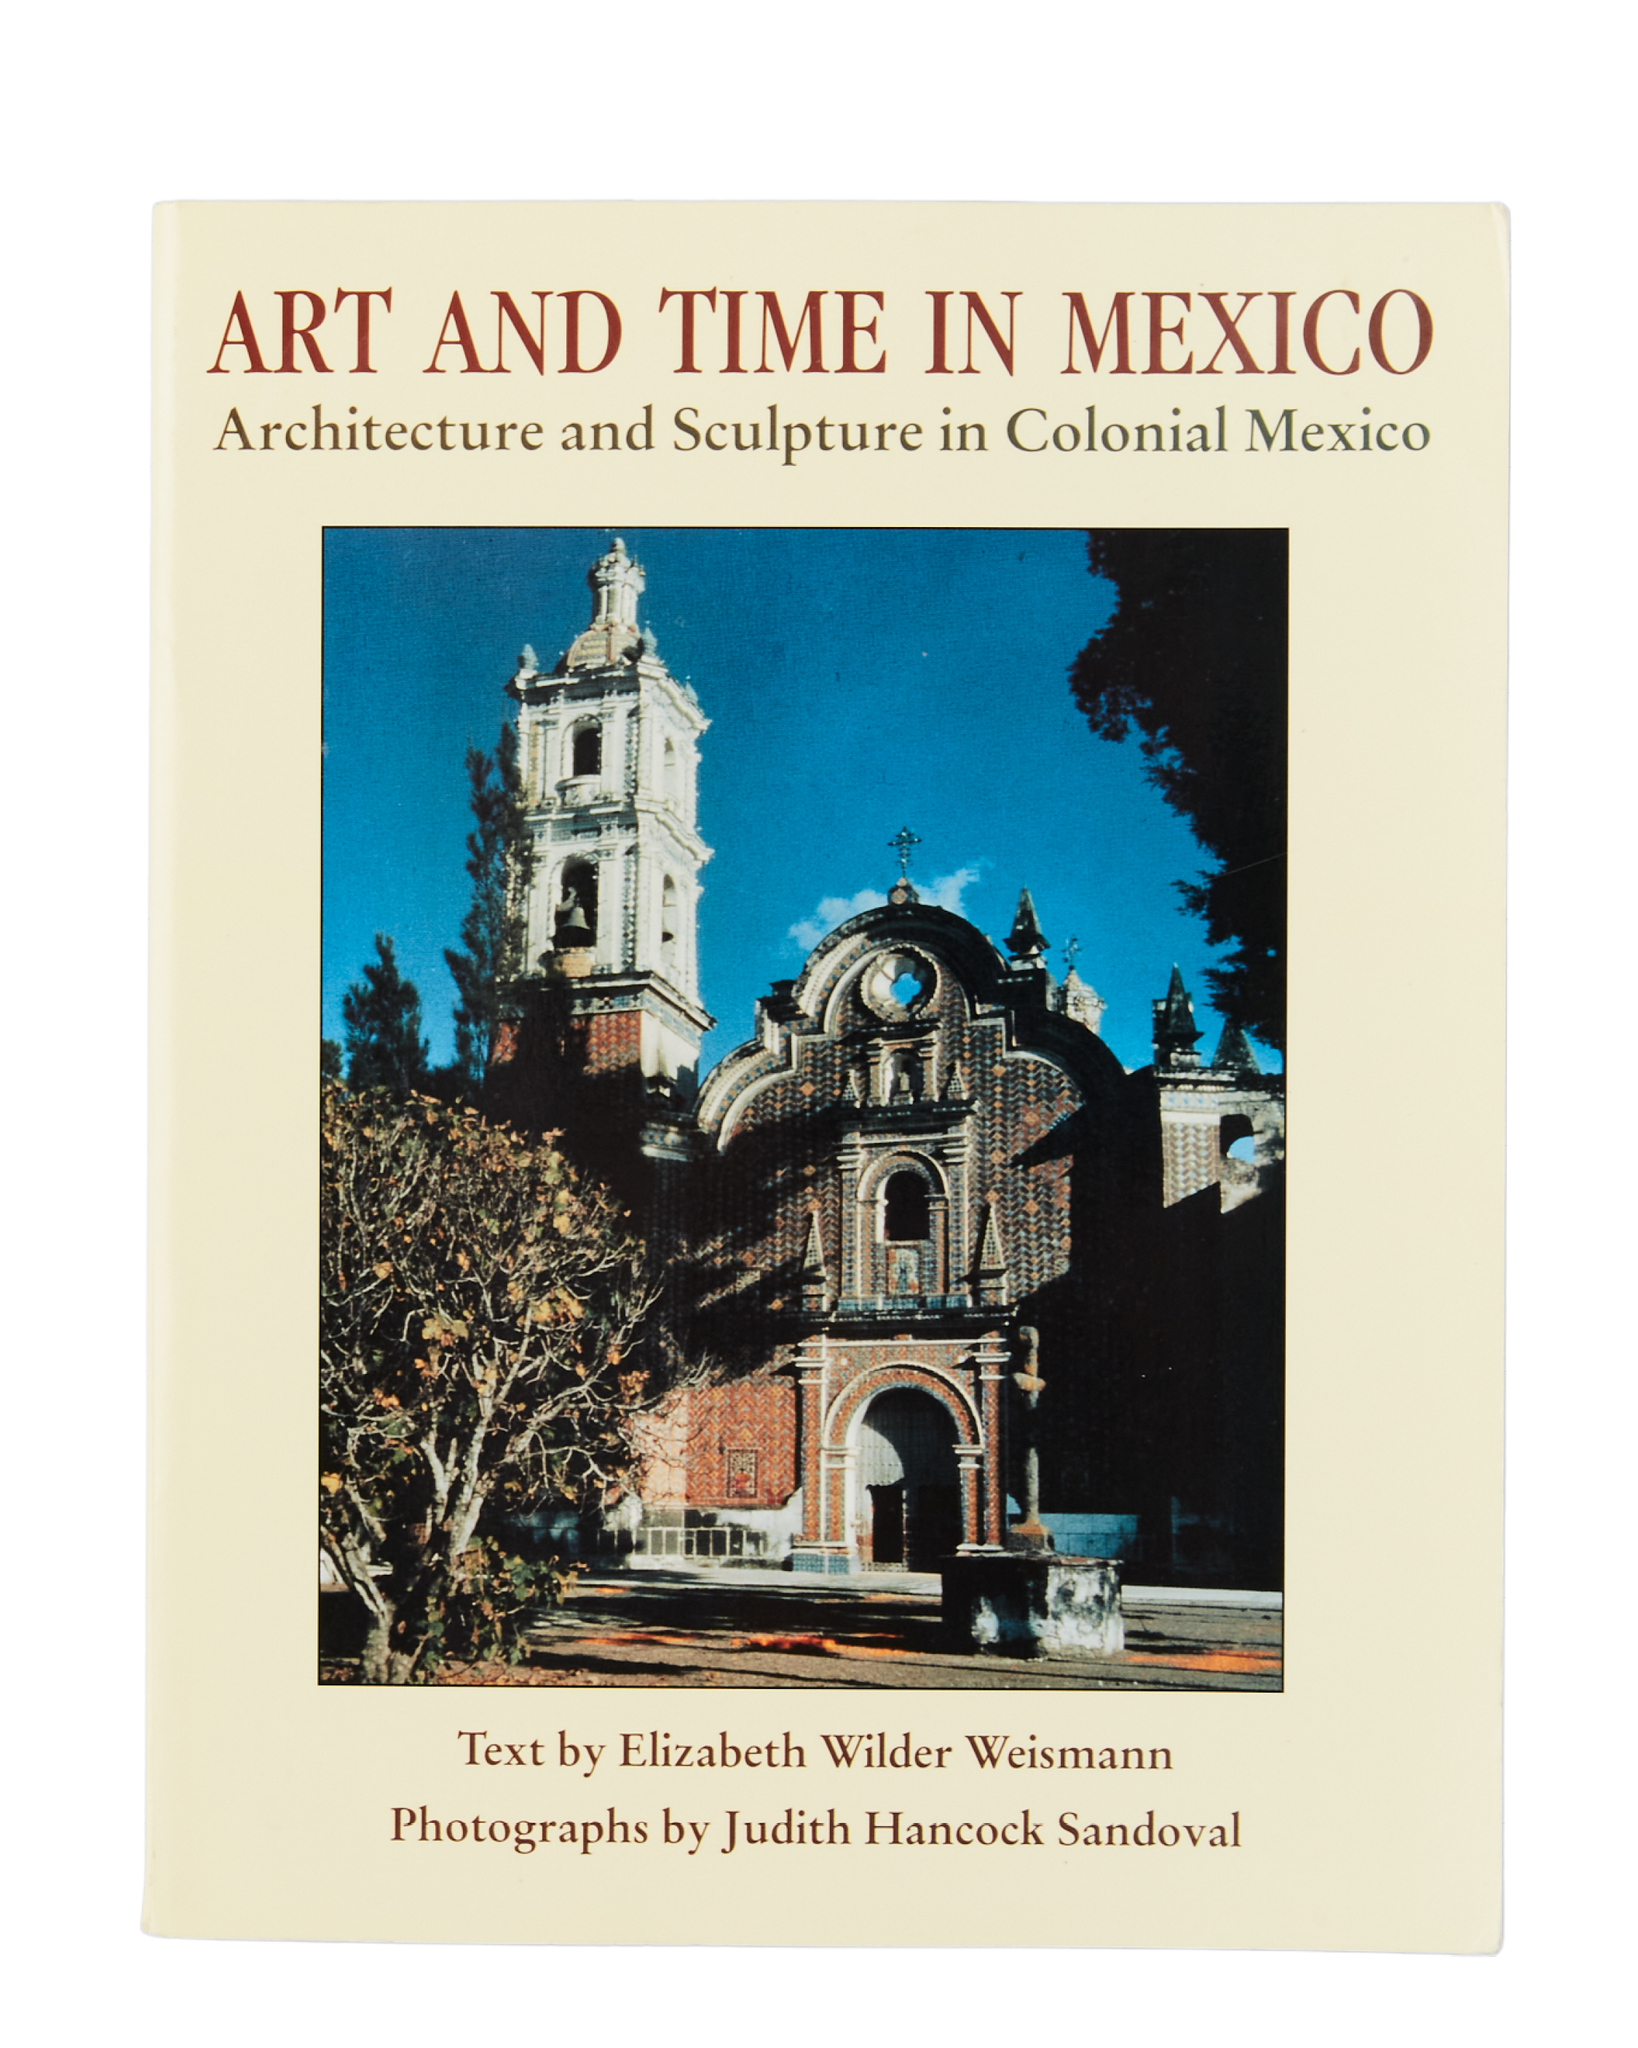 Art and Time in Mexico: Architecture and Sculpture in Colonial Mexico